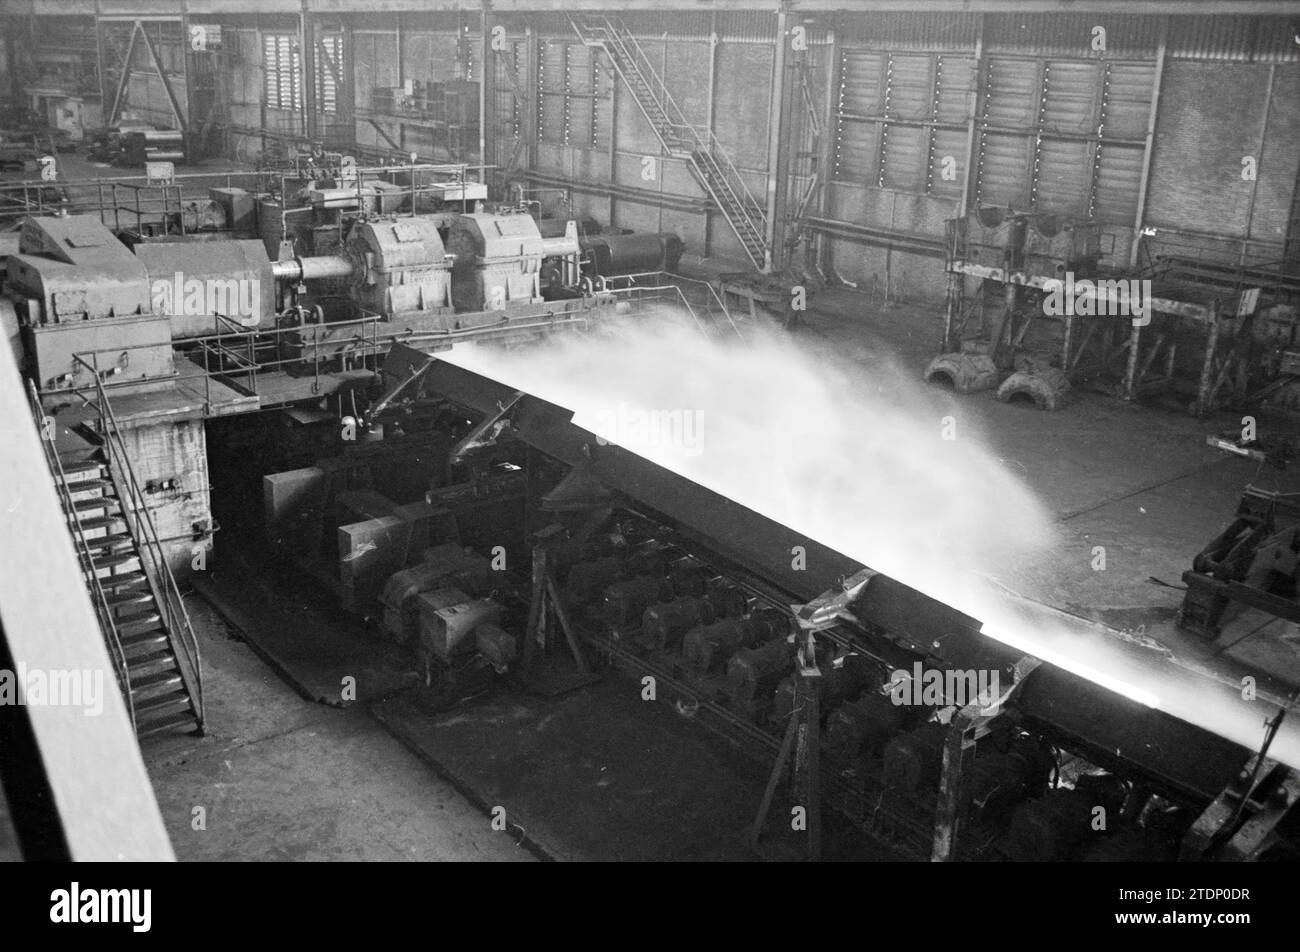 Casting machines, blast furnaces, 28-02-1983, Whizgle News from the Past, Tailored for the Future. Explore historical narratives, Dutch The Netherlands agency image with a modern perspective, bridging the gap between yesterday's events and tomorrow's insights. A timeless journey shaping the stories that shape our future Stock Photo